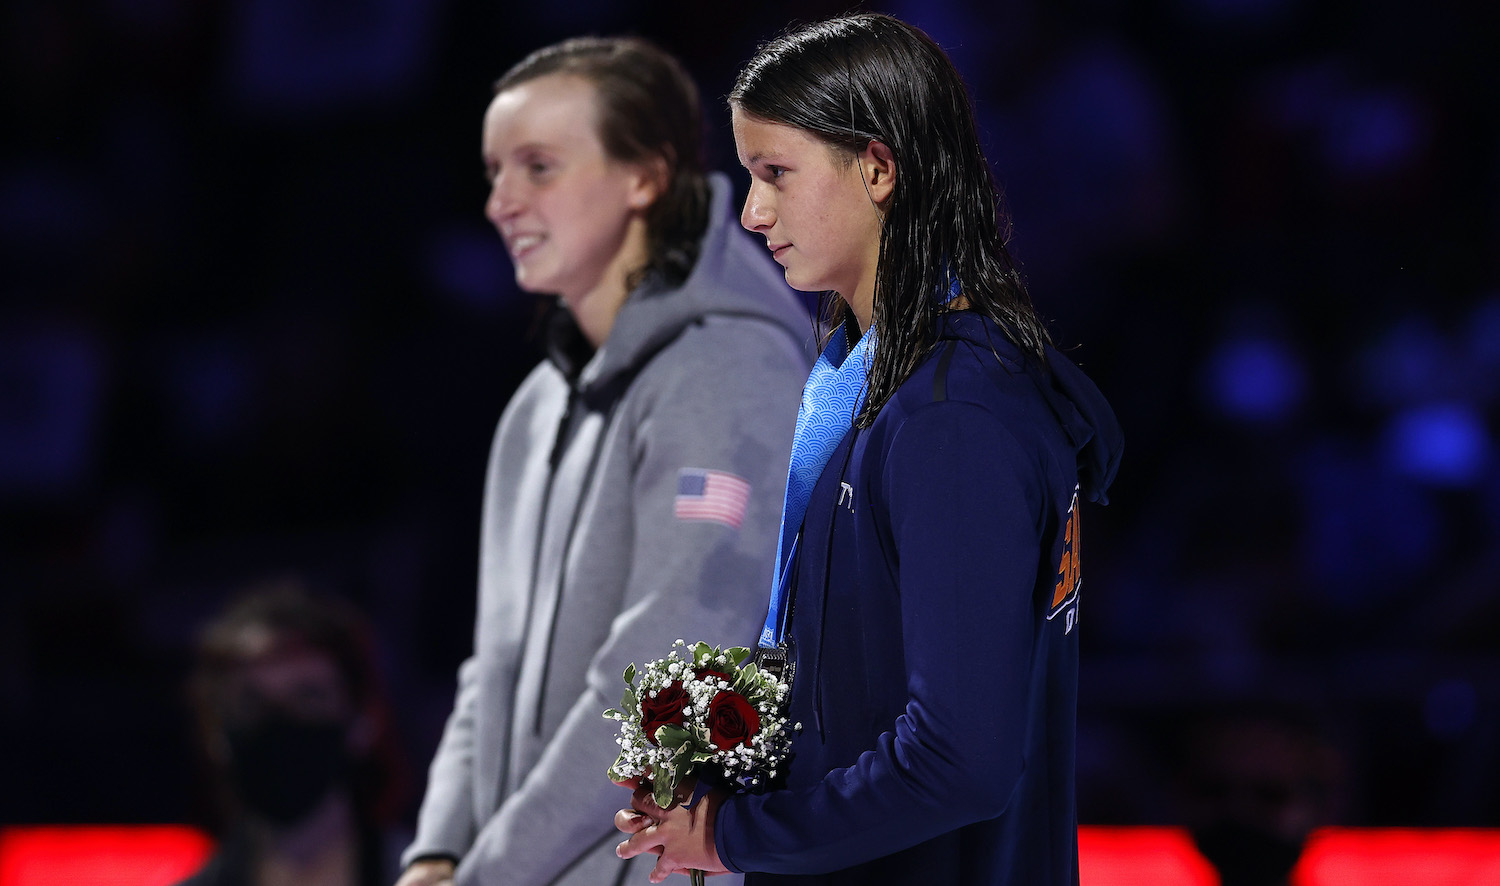 OMAHA, NEBRASKA - JUNE 19: Katie Ledecky and Katie Grimes react during the Women’s 800m freestyle medal ceremony during Day Seven of the 2021 U.S. Olympic Team Swimming Trials at CHI Health Center on June 19, 2021 in Omaha, Nebraska. (Photo by Maddie Meyer/Getty Images)